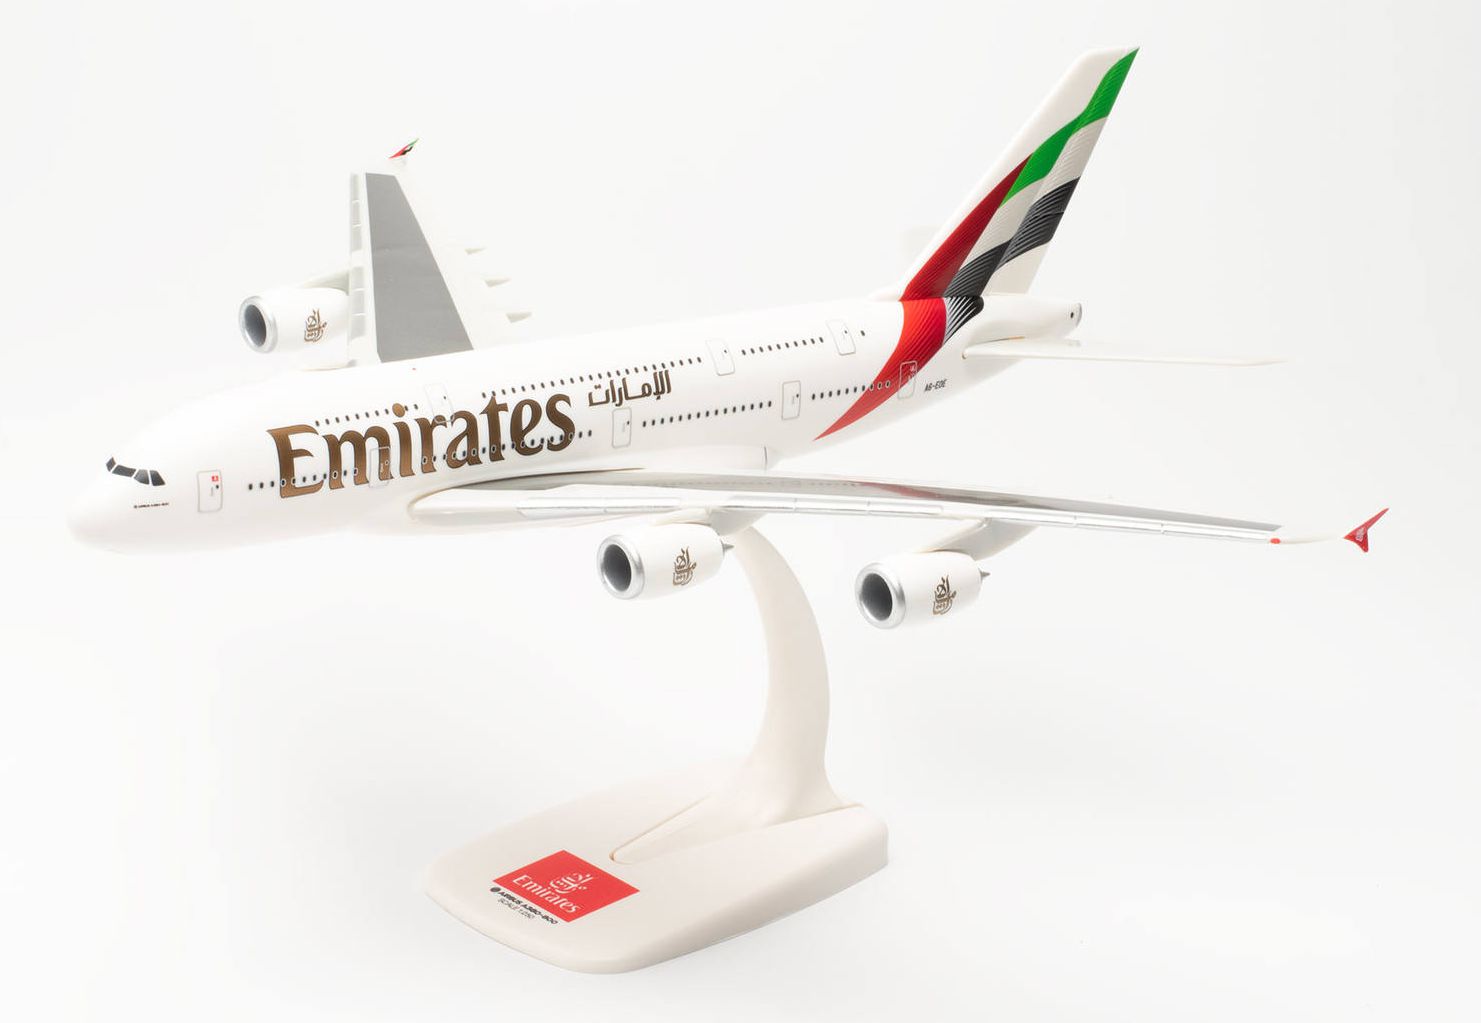 Herpa 614054 - Emirates Airbus A380 - new 2023 Colors - A6-EOE